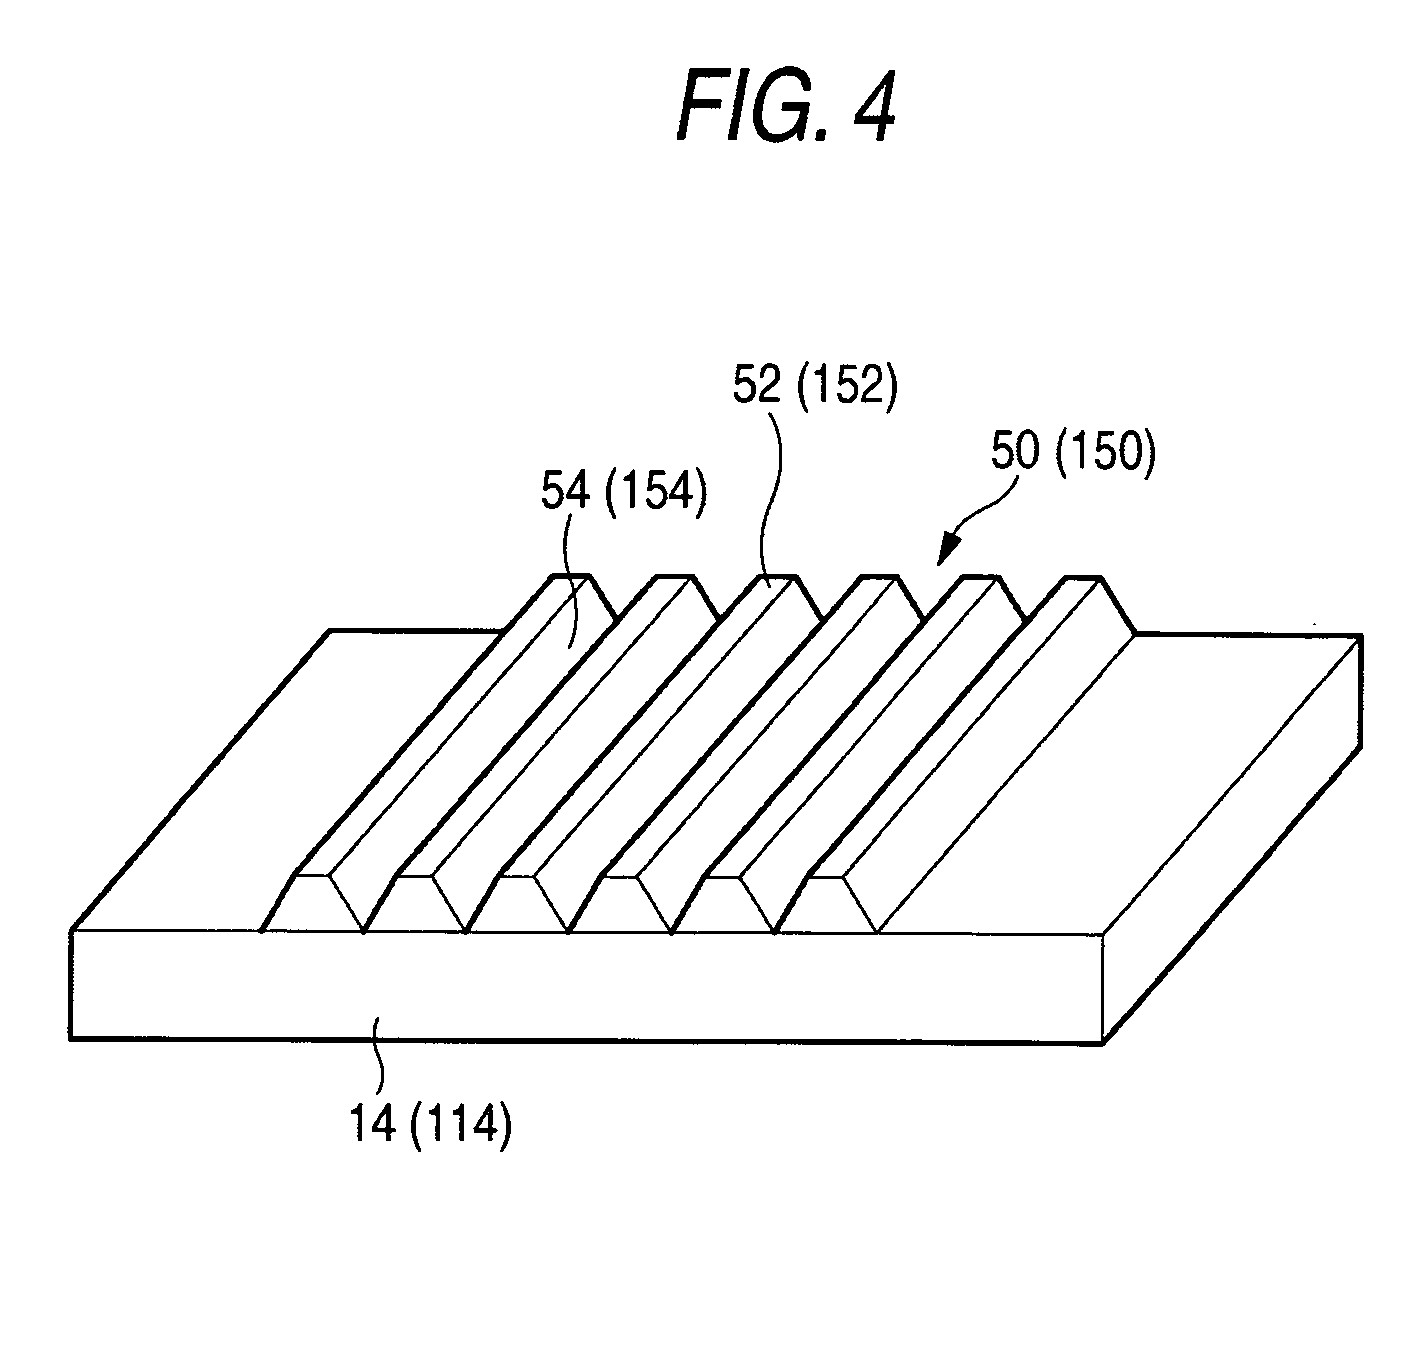 Selectively adherent substrate and method for producing the same